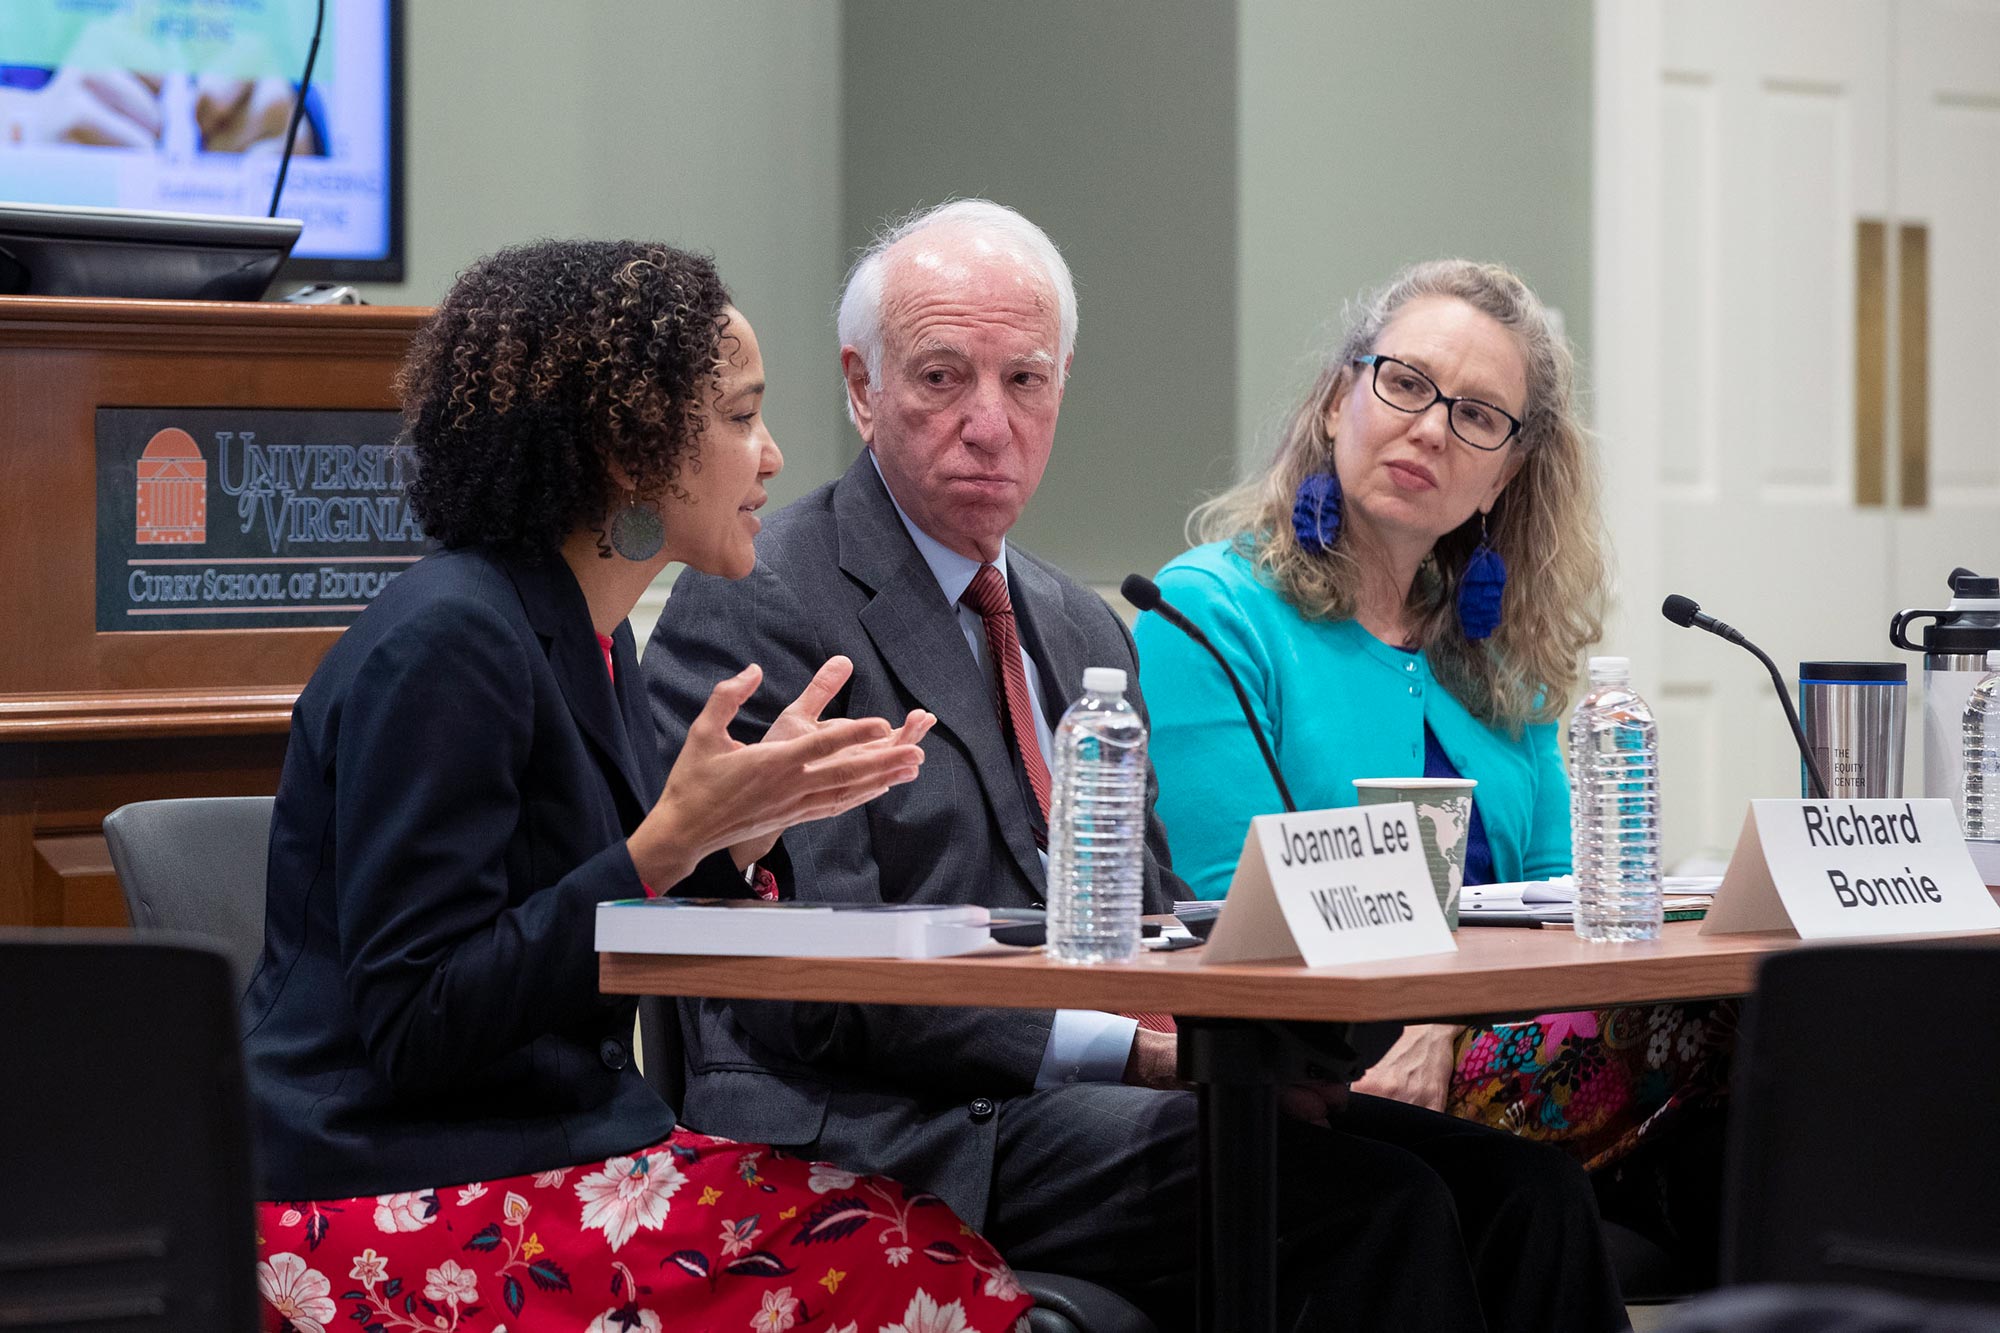 Nancy Deutsch, right,  Richard J. Bonnie, middle, and Joanna Lee Williams, left, sit at a table during a panel discussion